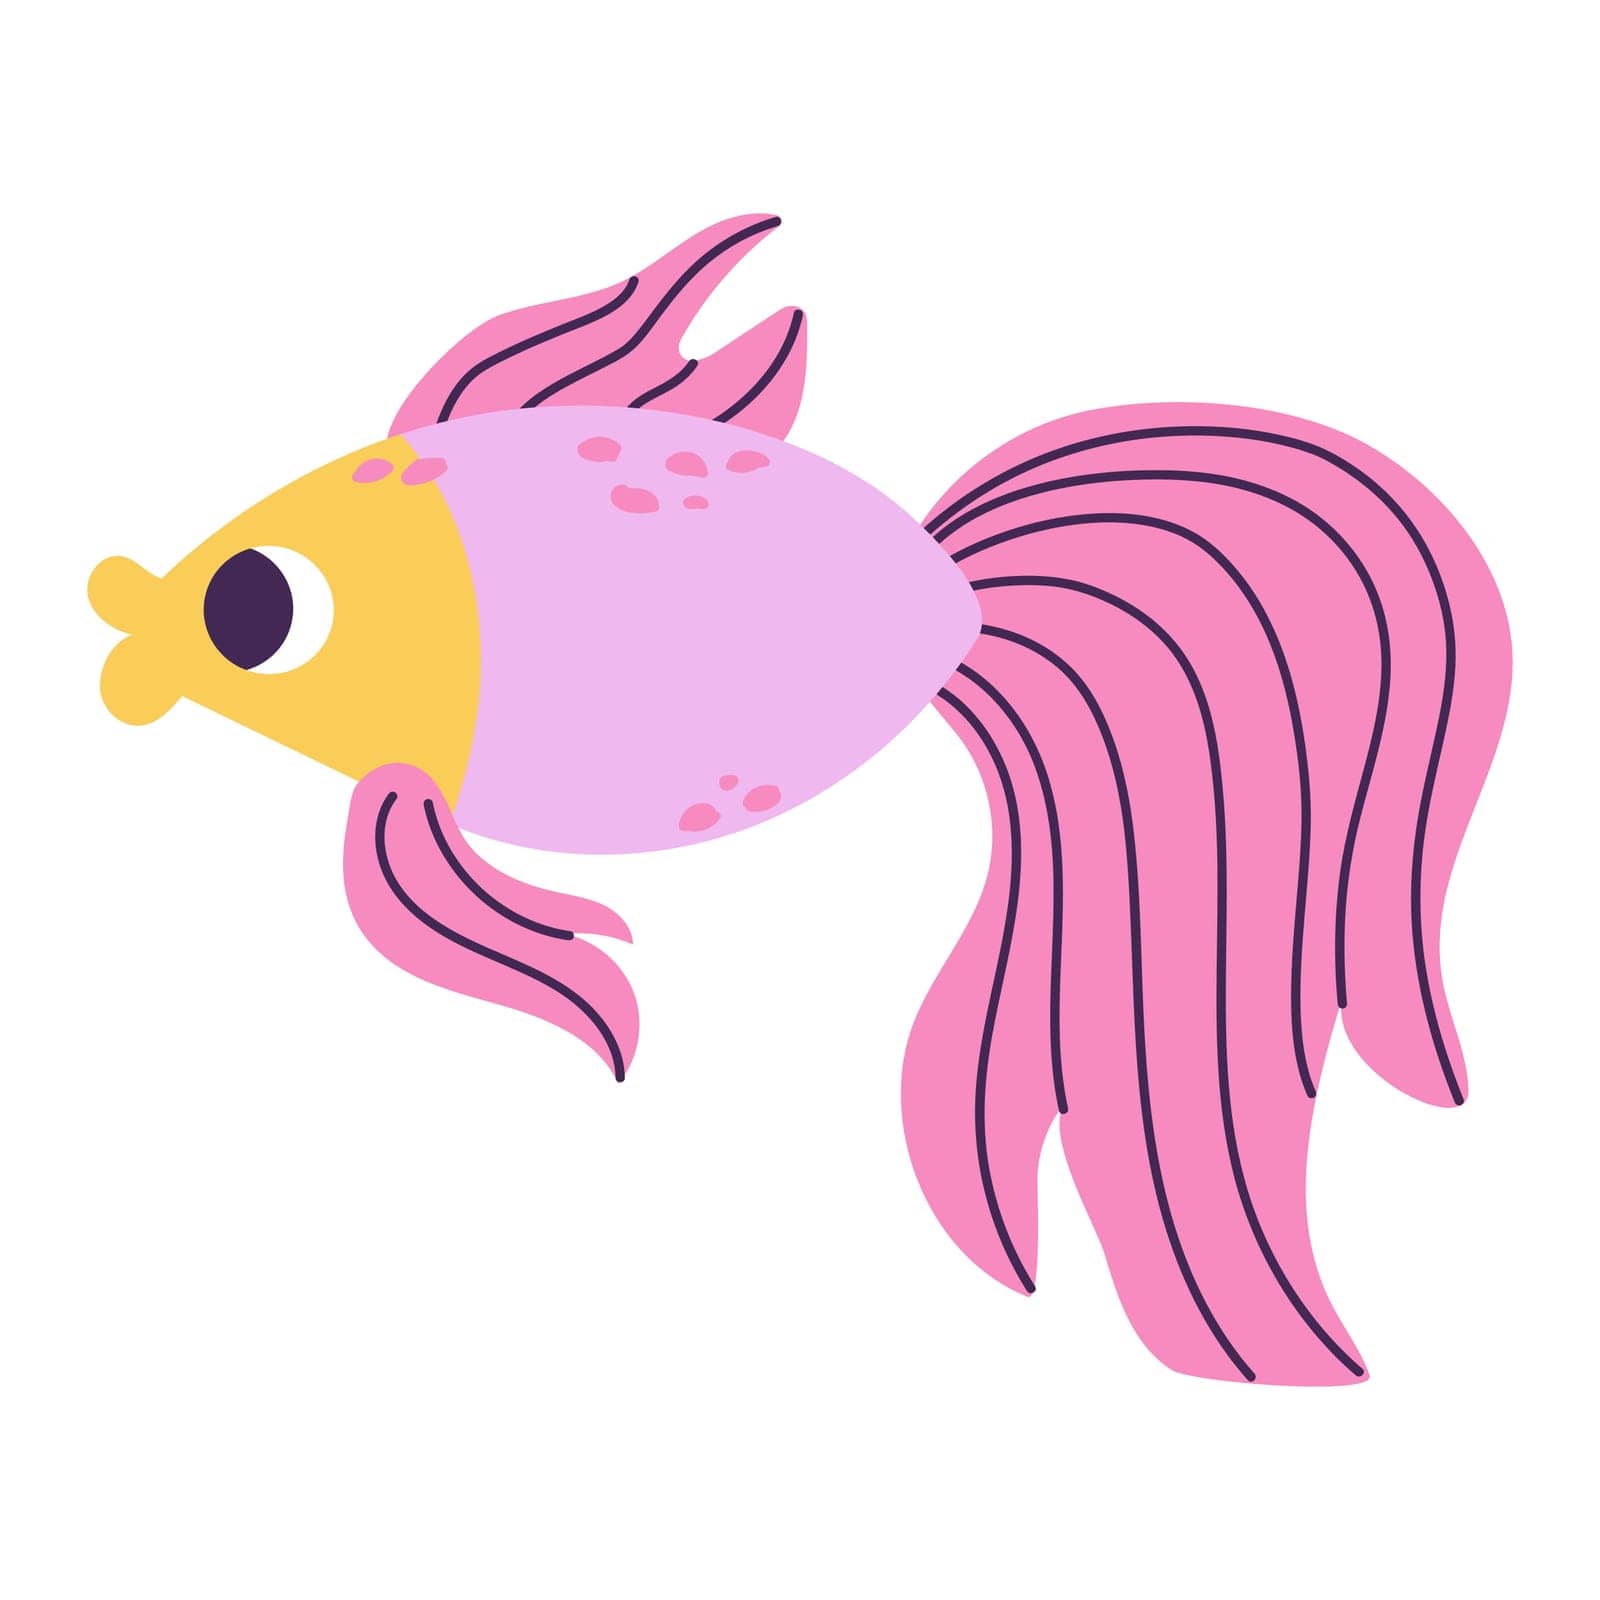 Isolated cartoon marine goldfish with spots in hand drawn flat style on white background. by Екатерина